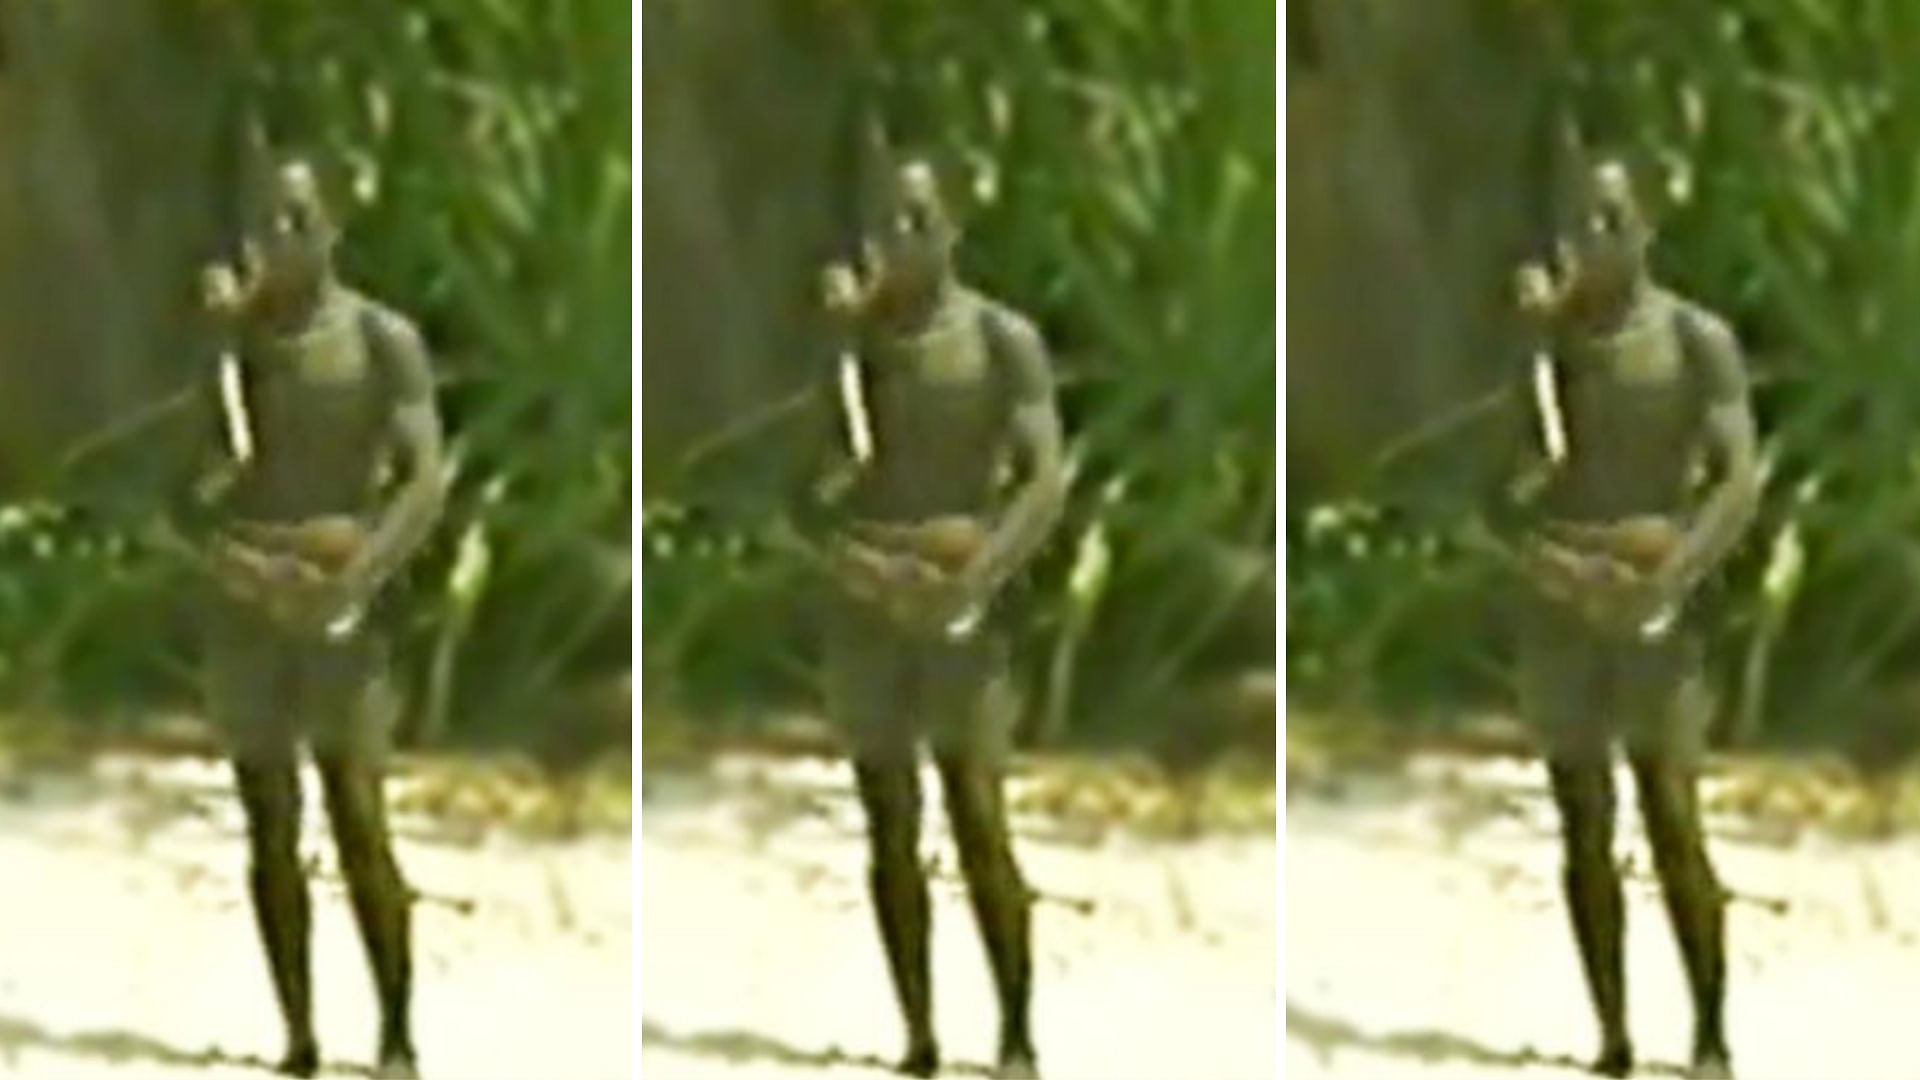 The Sentinelese are thought to have inhabited the North Sentinel island of the Andamans for about up to 60,000 years.